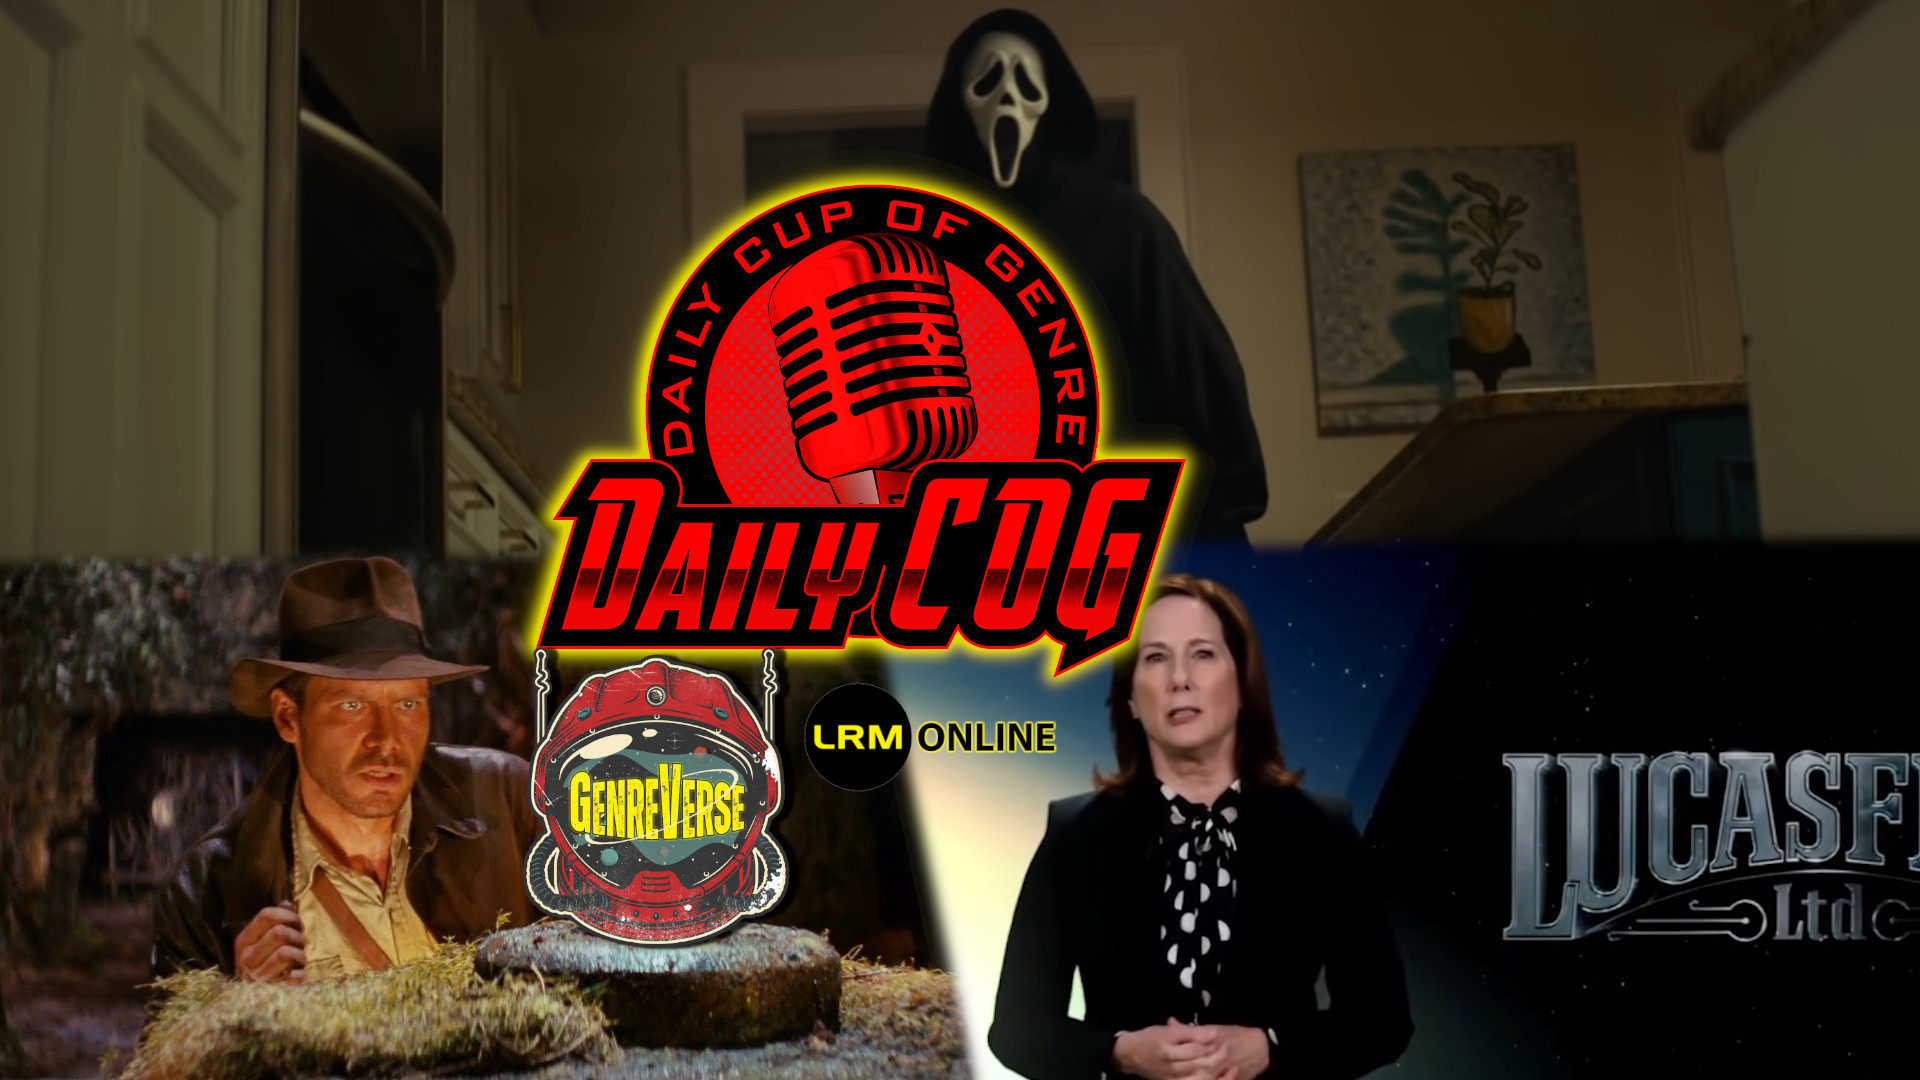 Indiana Jones 5 Plot Leak Is HUGE (Time Stamped Spoilers), Kathleen Kennedy’s Goals At Lucasfilm, Friday Frights: Scream 5 Trailer And Slasher Flick Picks | Daily COG